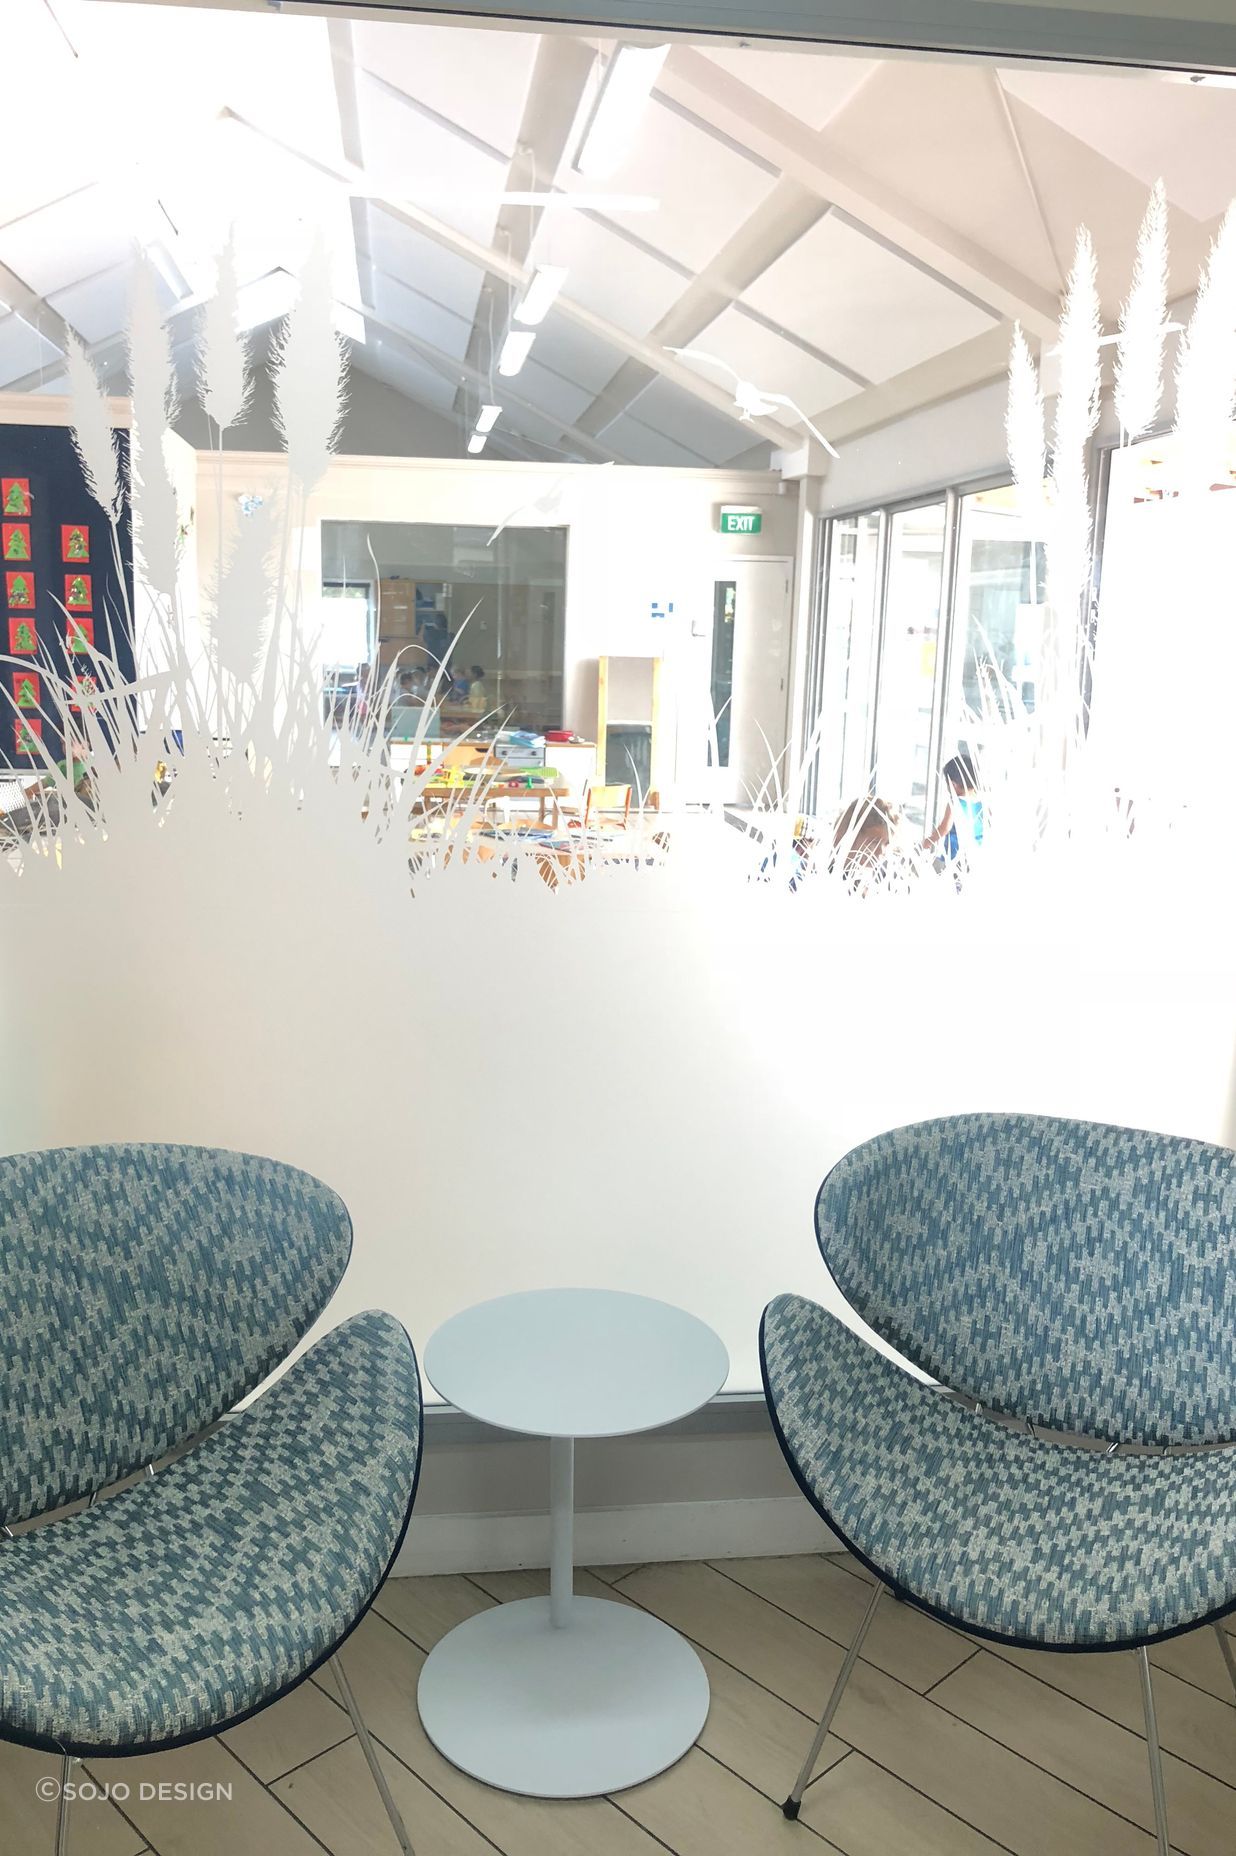 Relaxing chairs for staff, window decals for privacy